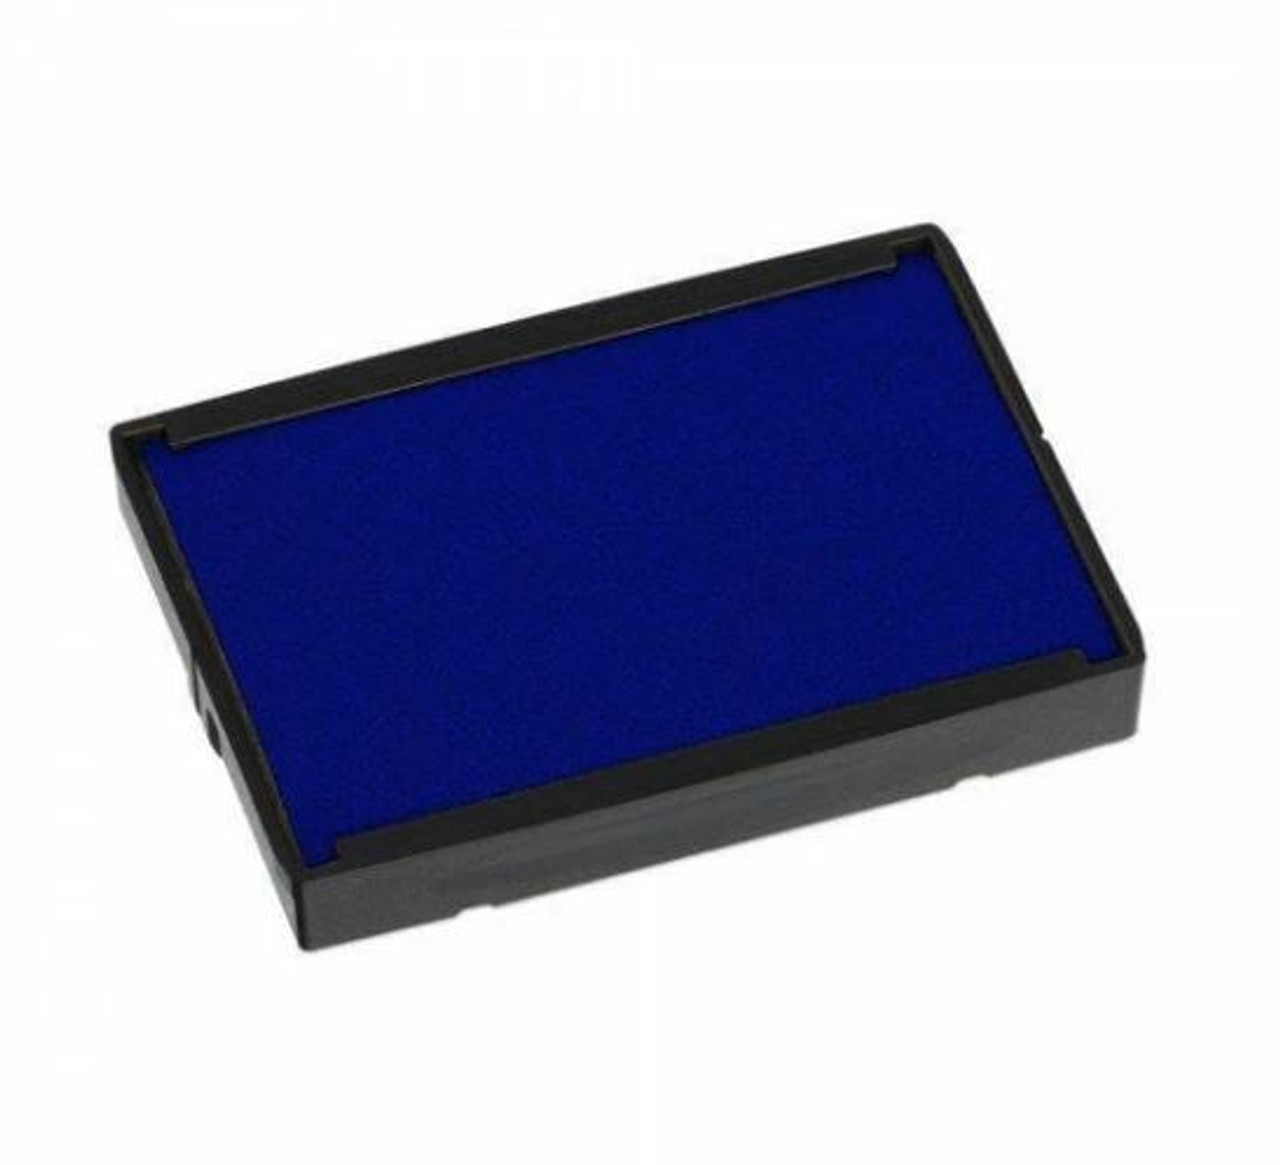 Black 4729 BLACK Replacement Pad for Trodat and Ideal Stamps 4929 